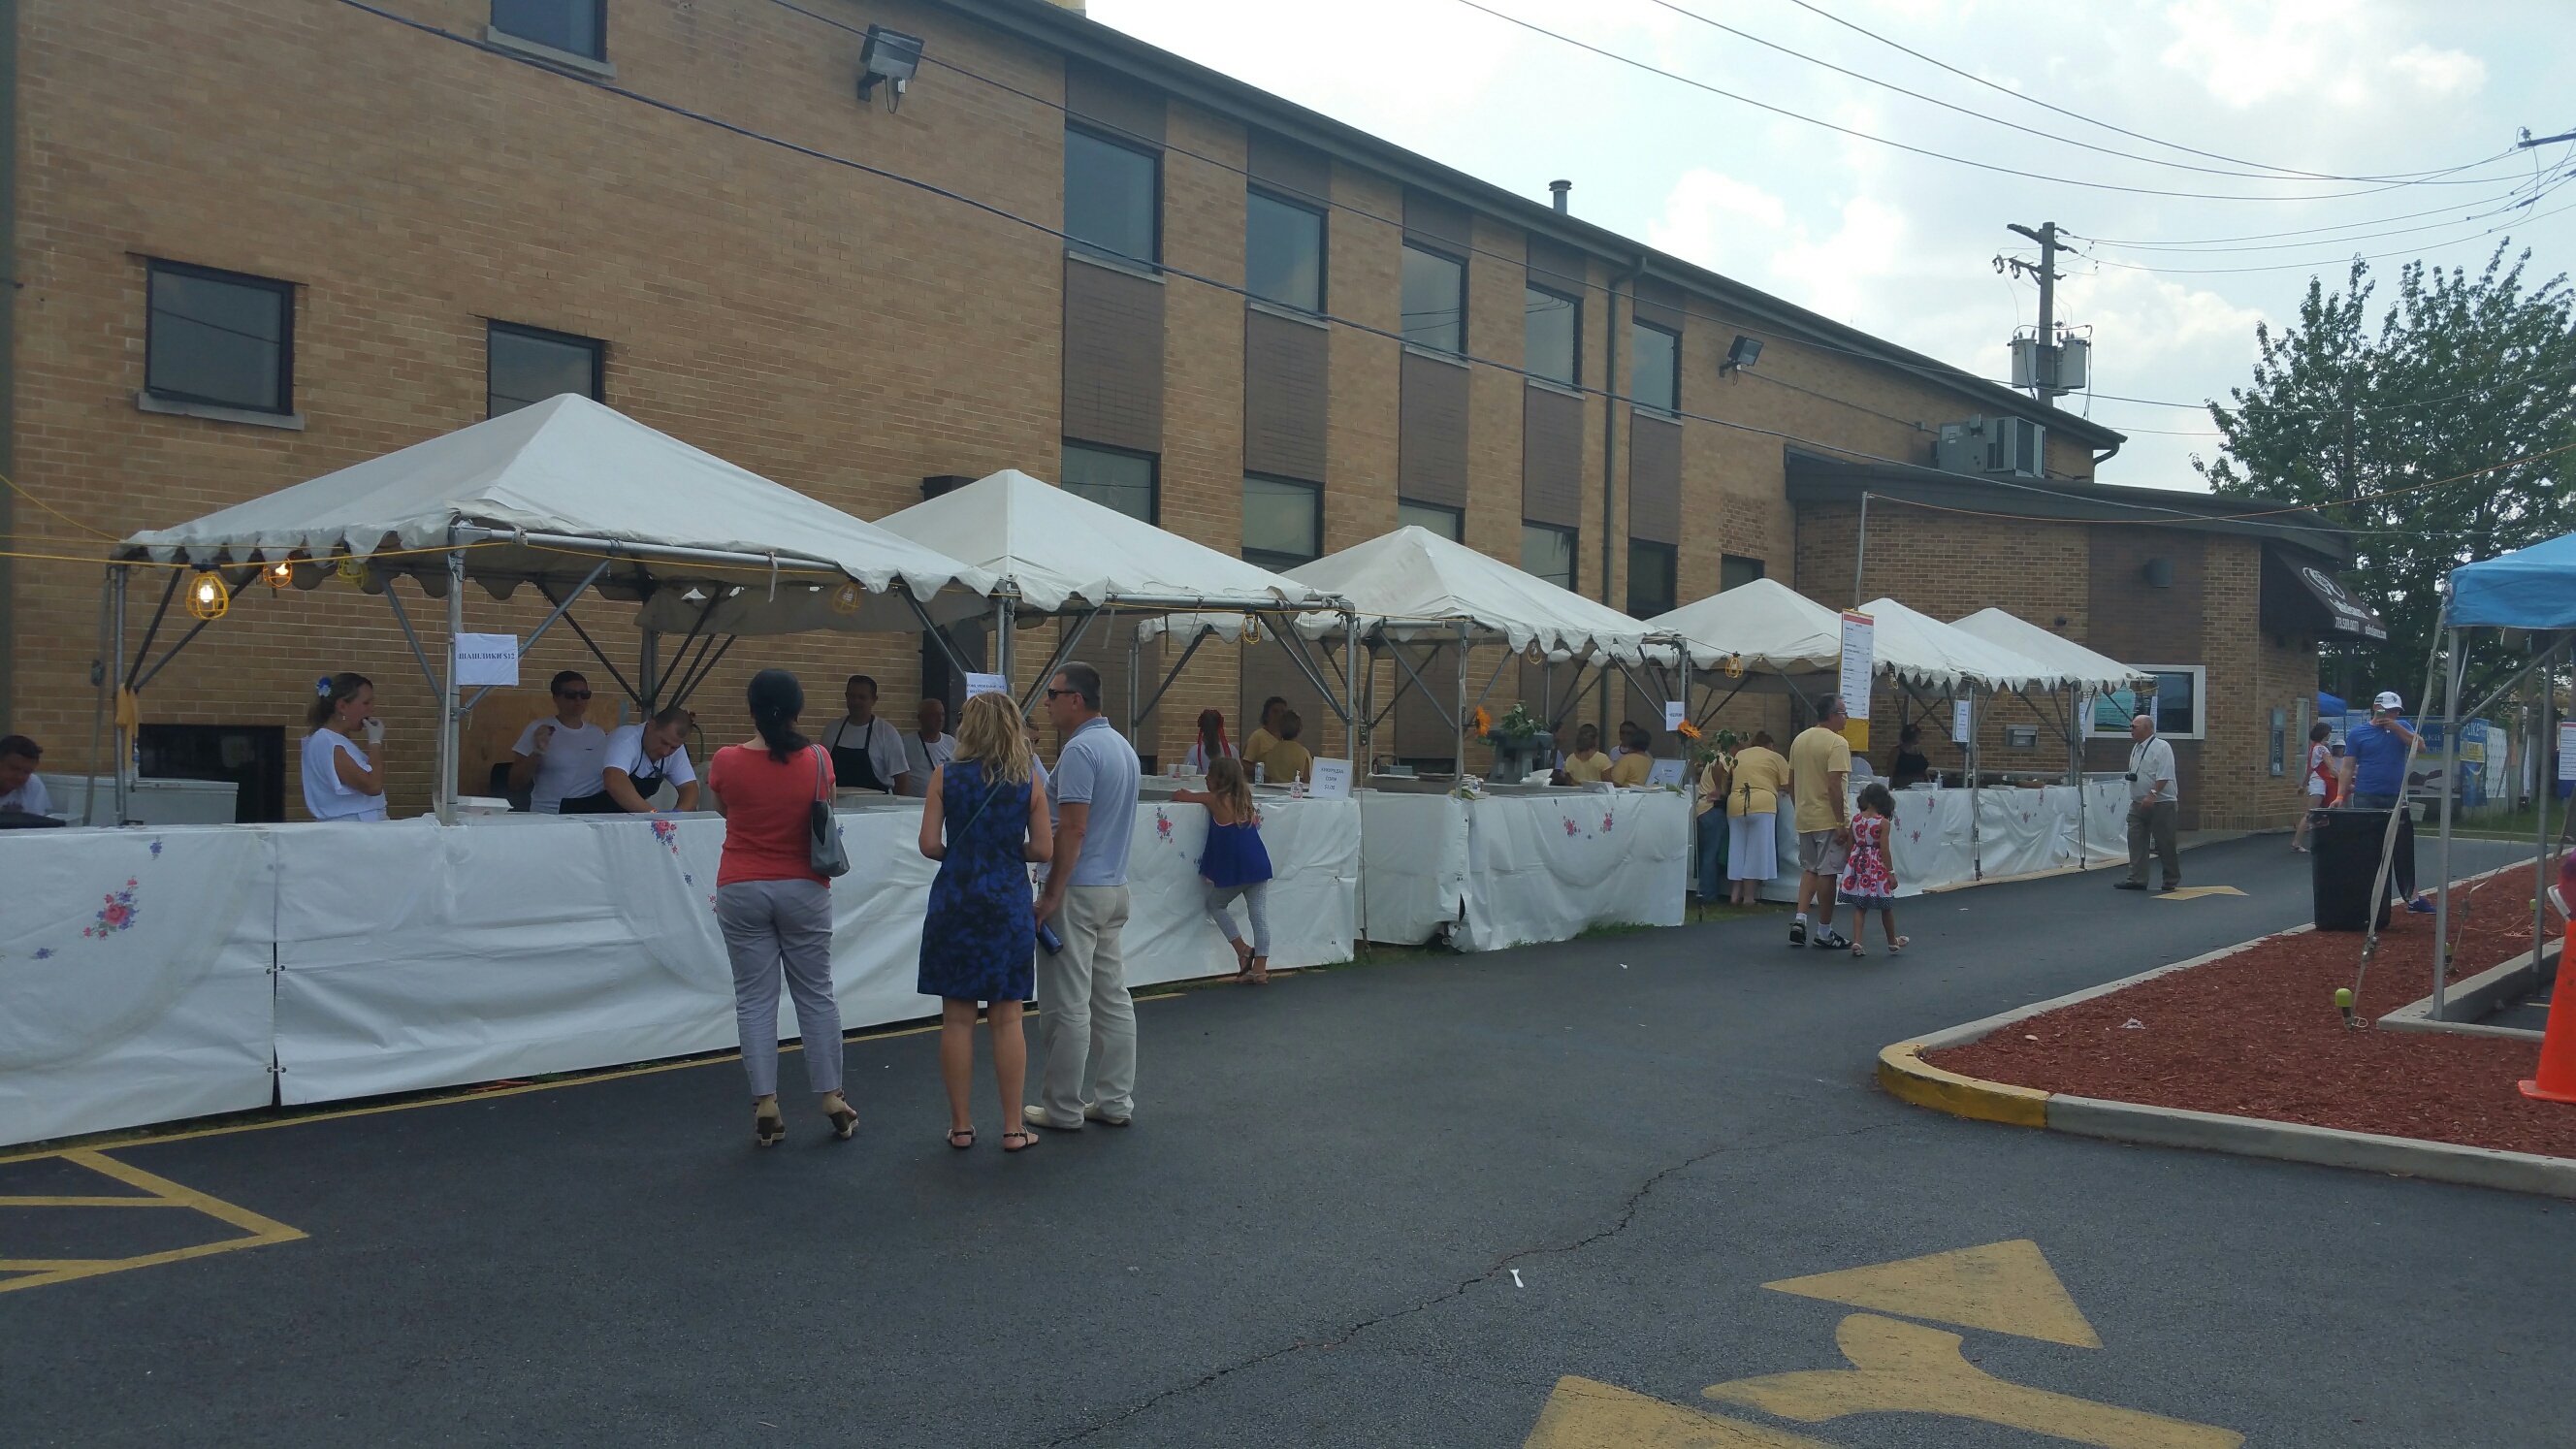 10' x 10' food tents with bally skirting